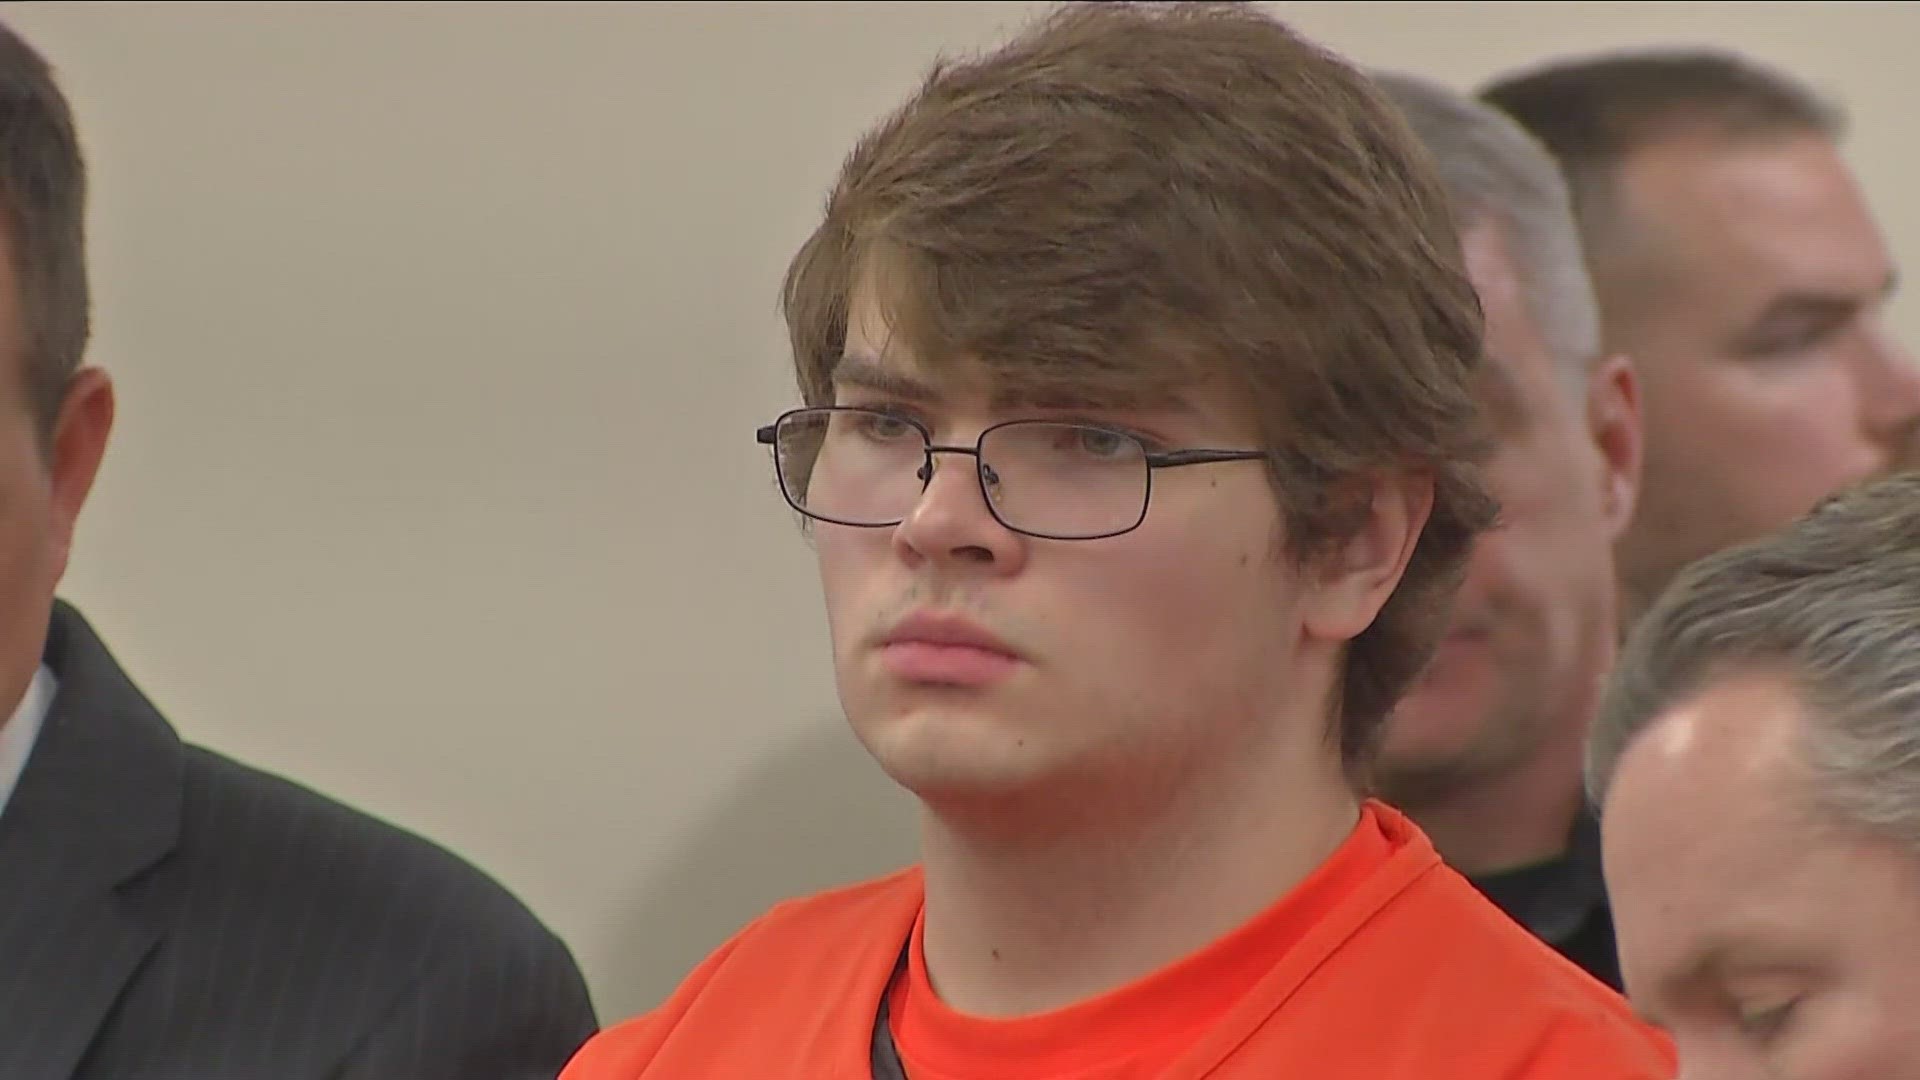 The notice of intent to seek the death penalty was filed by prosecutors Friday, ahead of a scheduled appearance for the gunman, Payton Gendron.